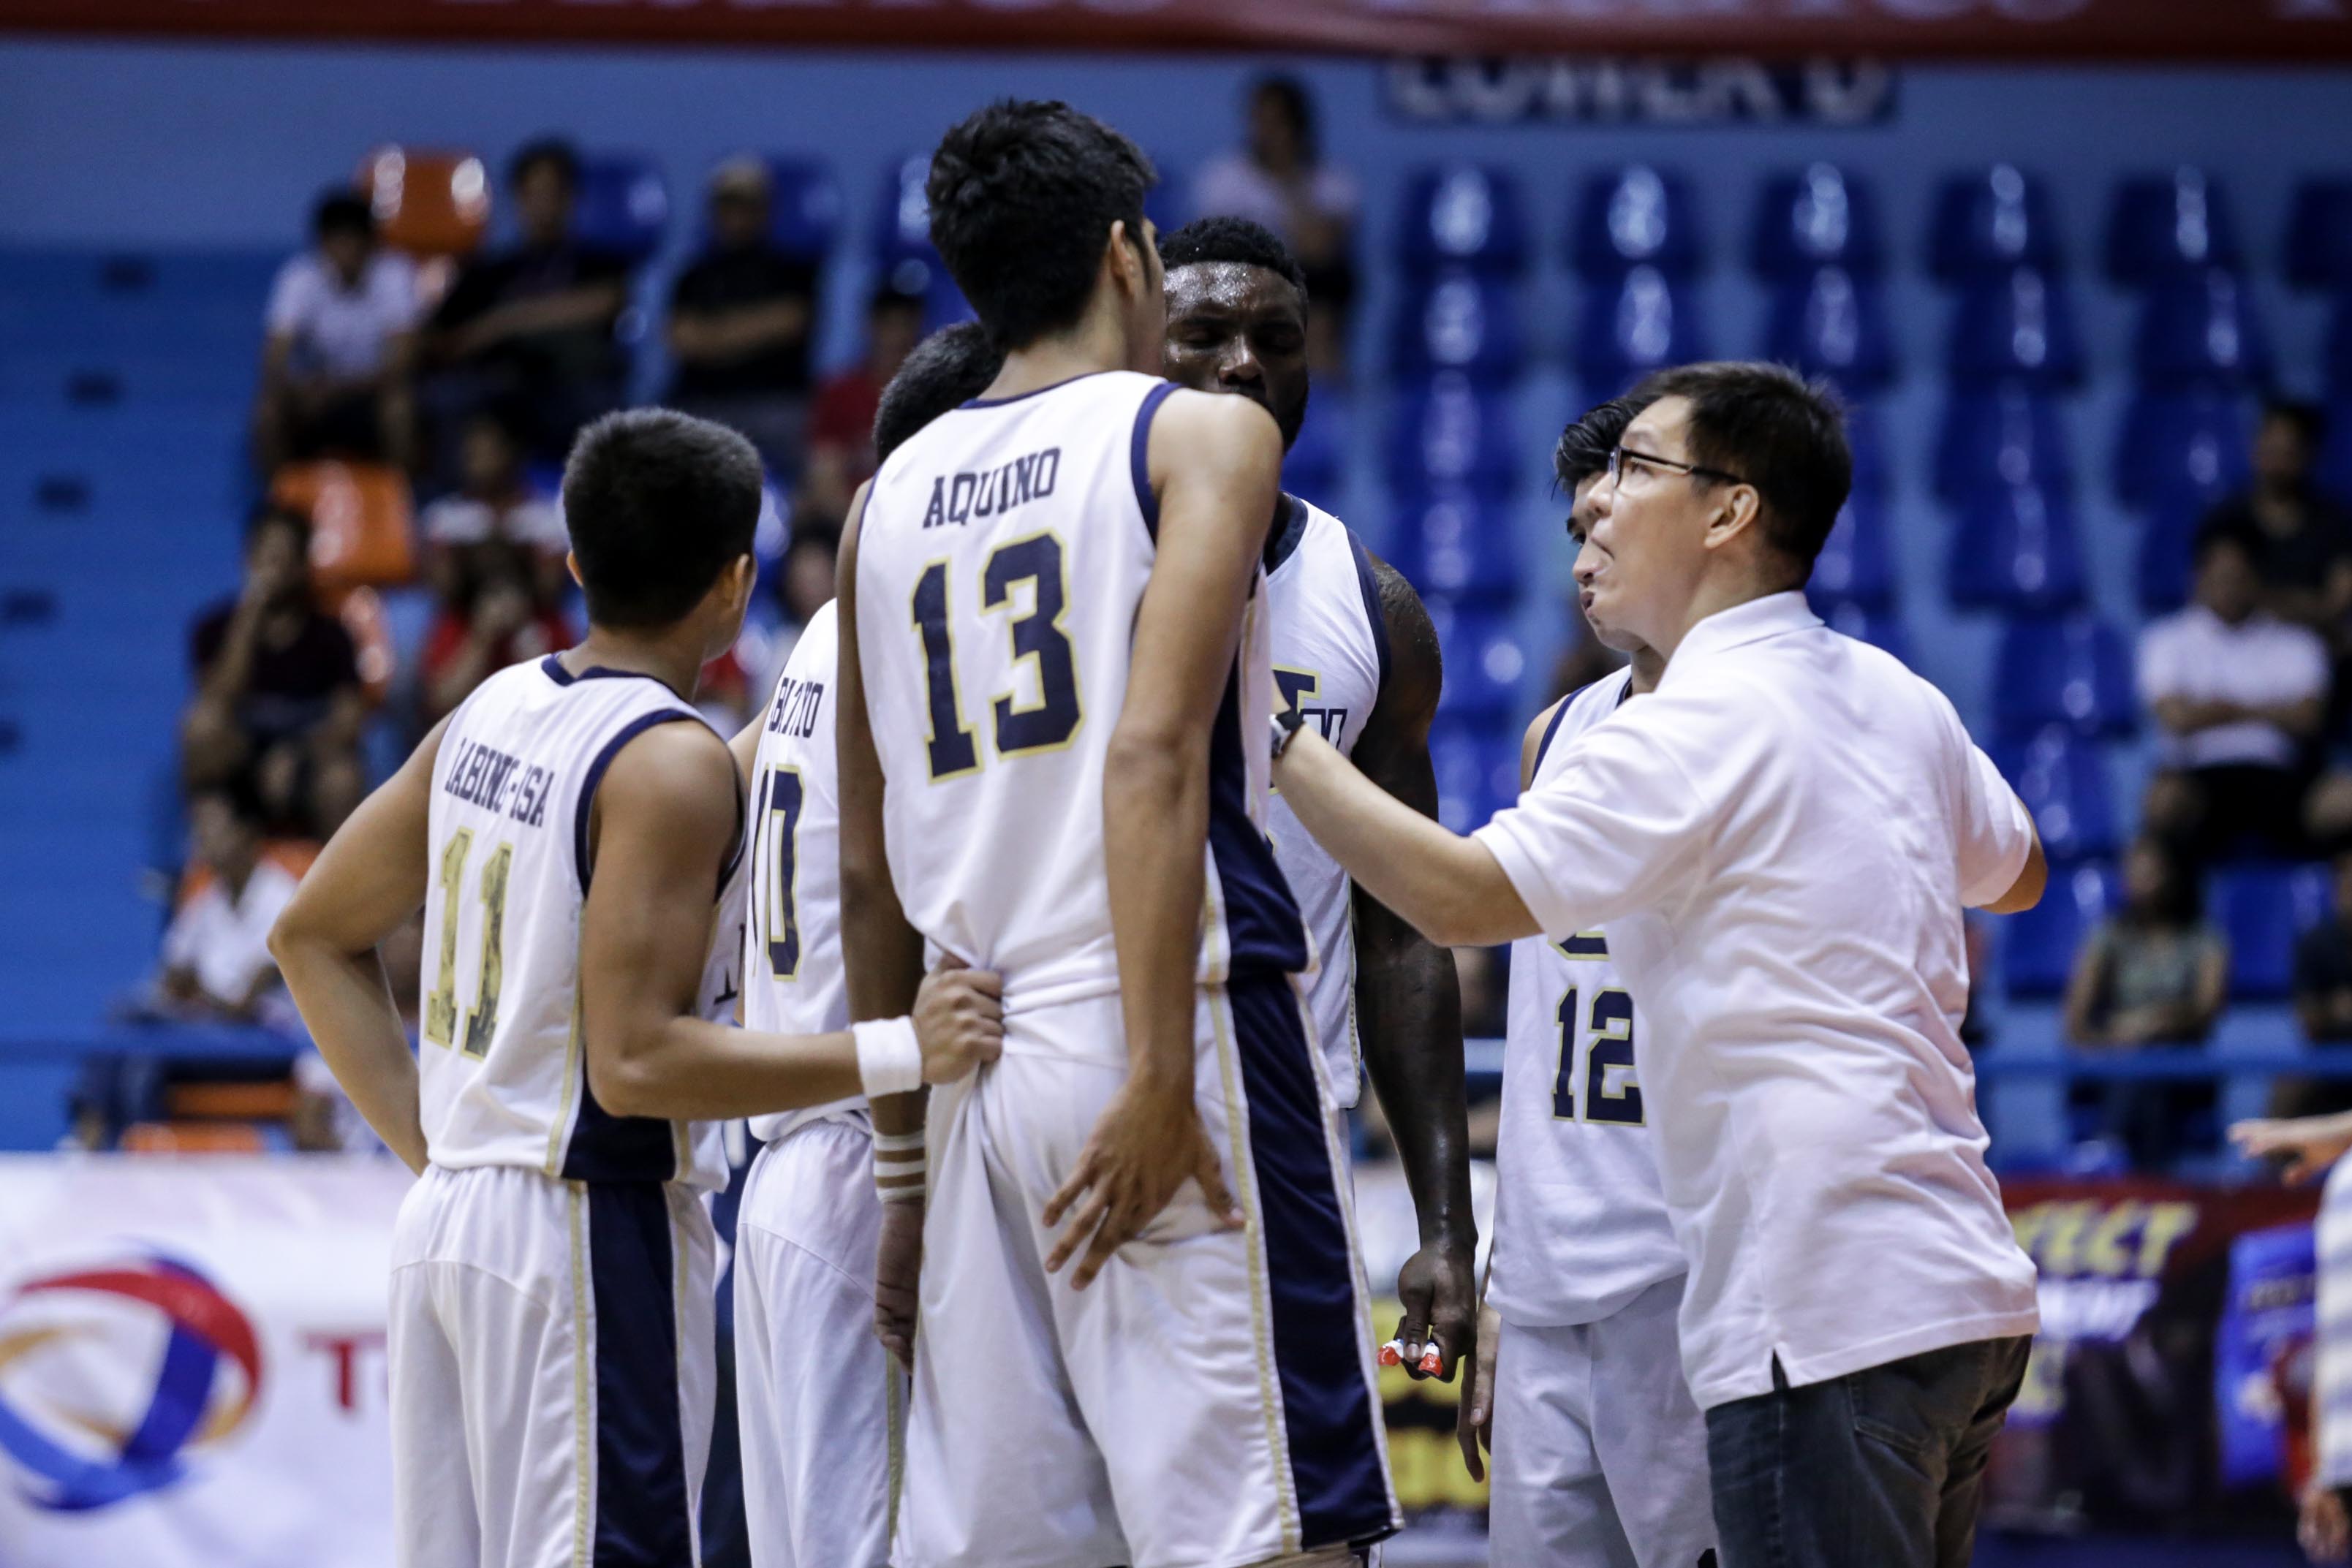 NU Bulldogs. Photo by Tristan Tamayo/INQUIRER.net